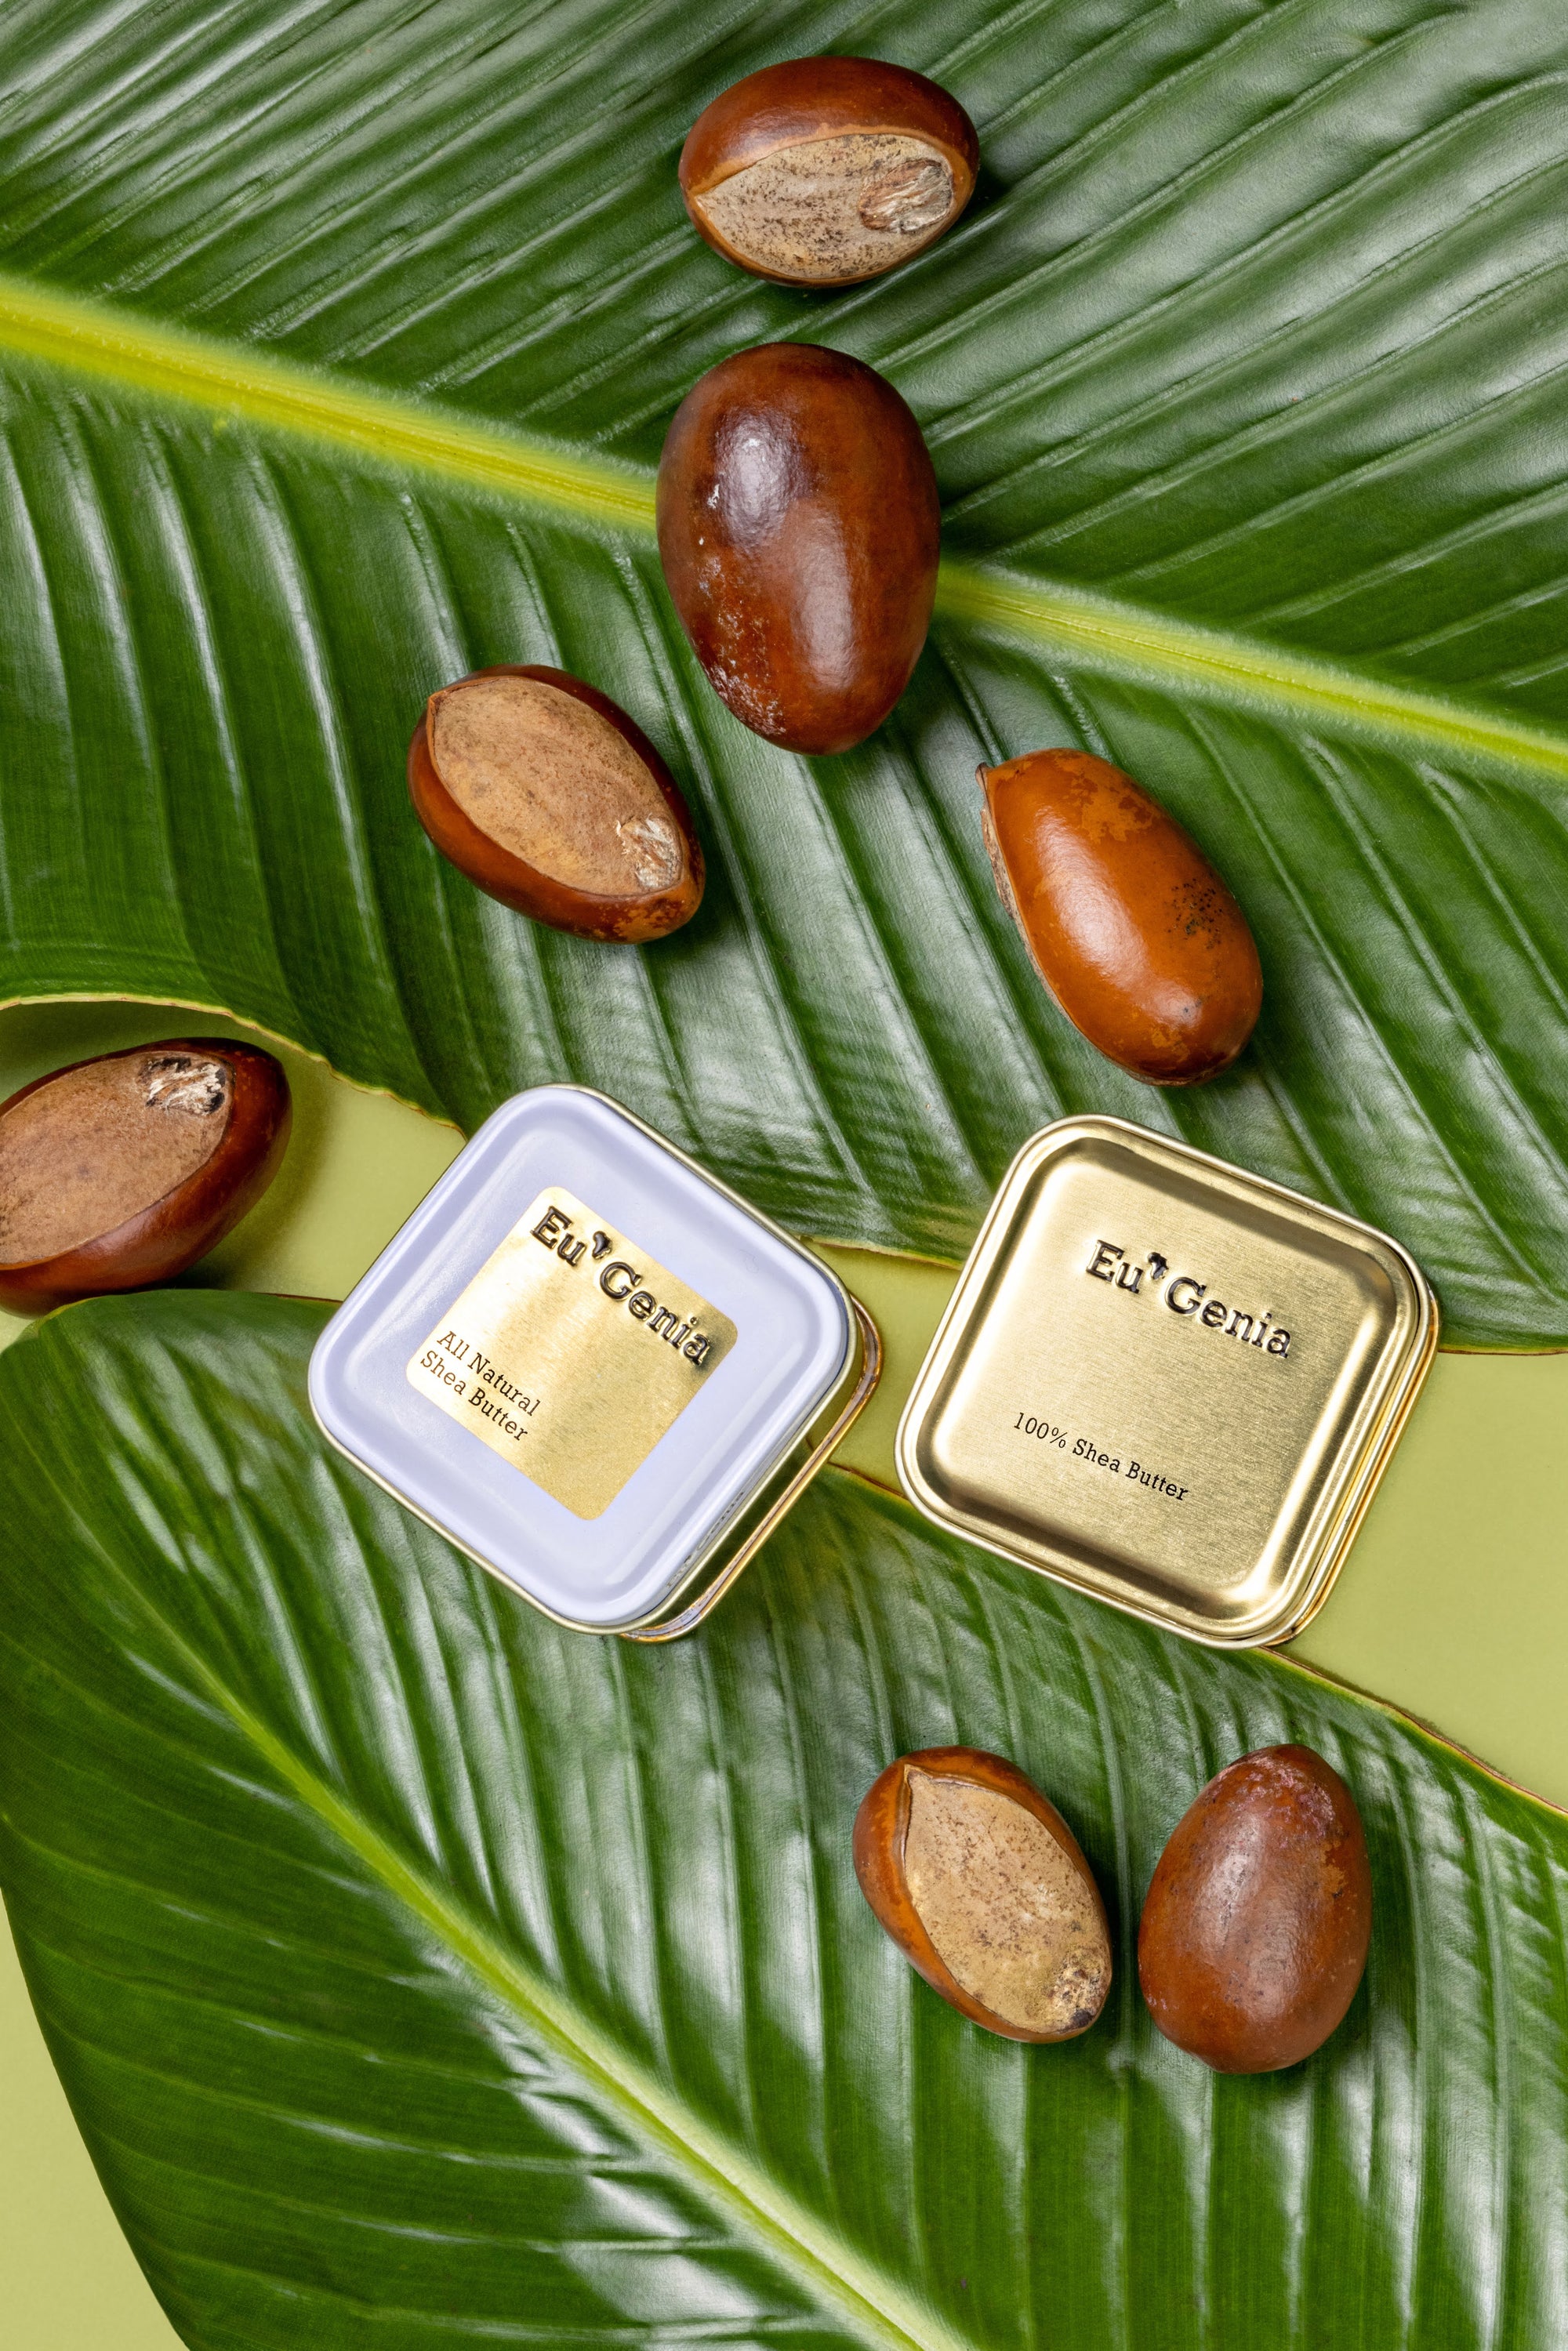 Two tins of shea butter on a leafy green background with shea nuts